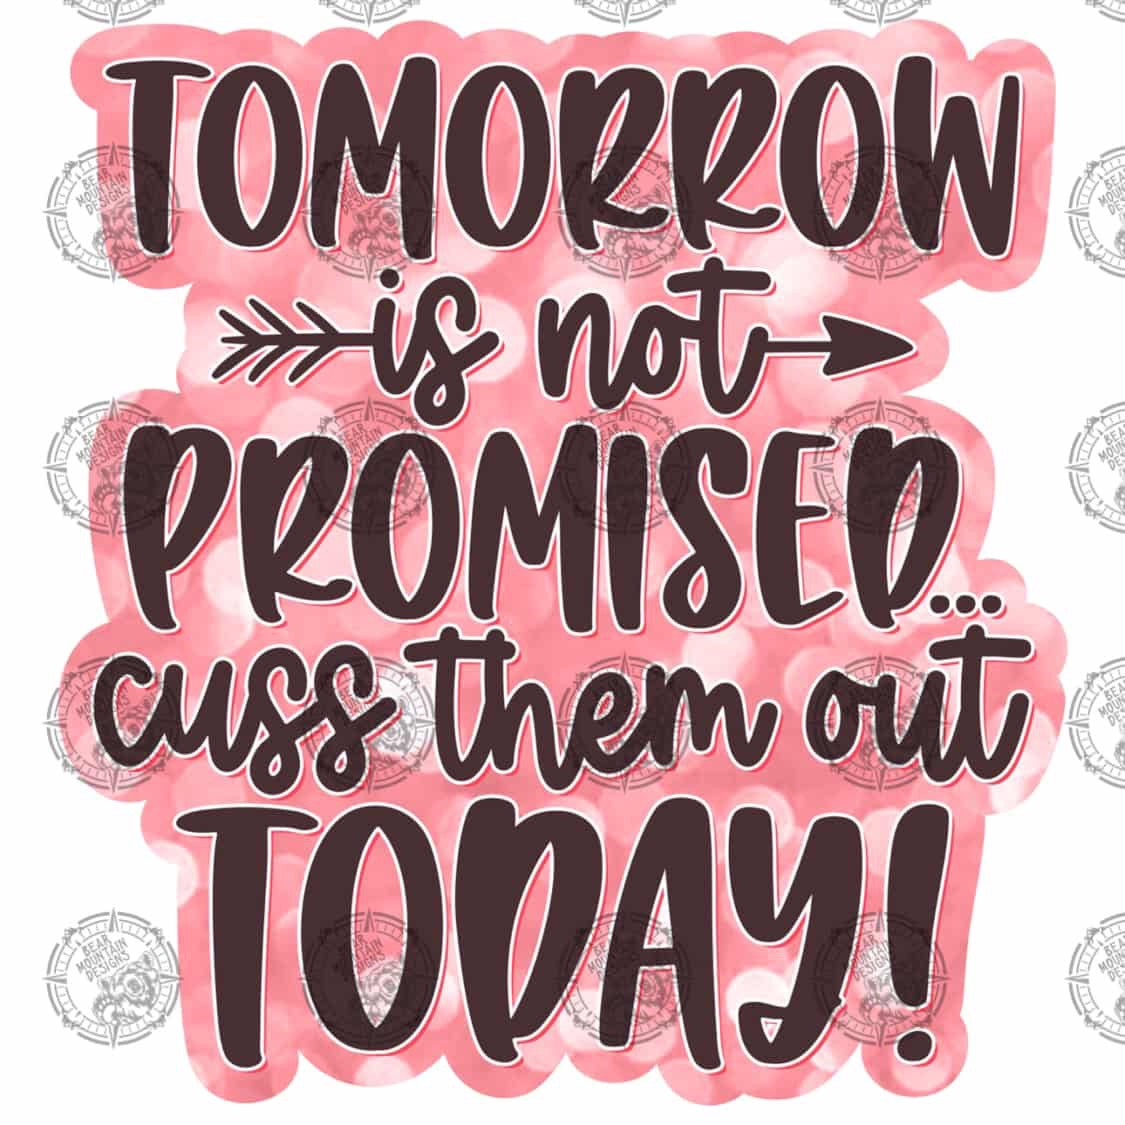 Tomorrow Is Not Promised - 2